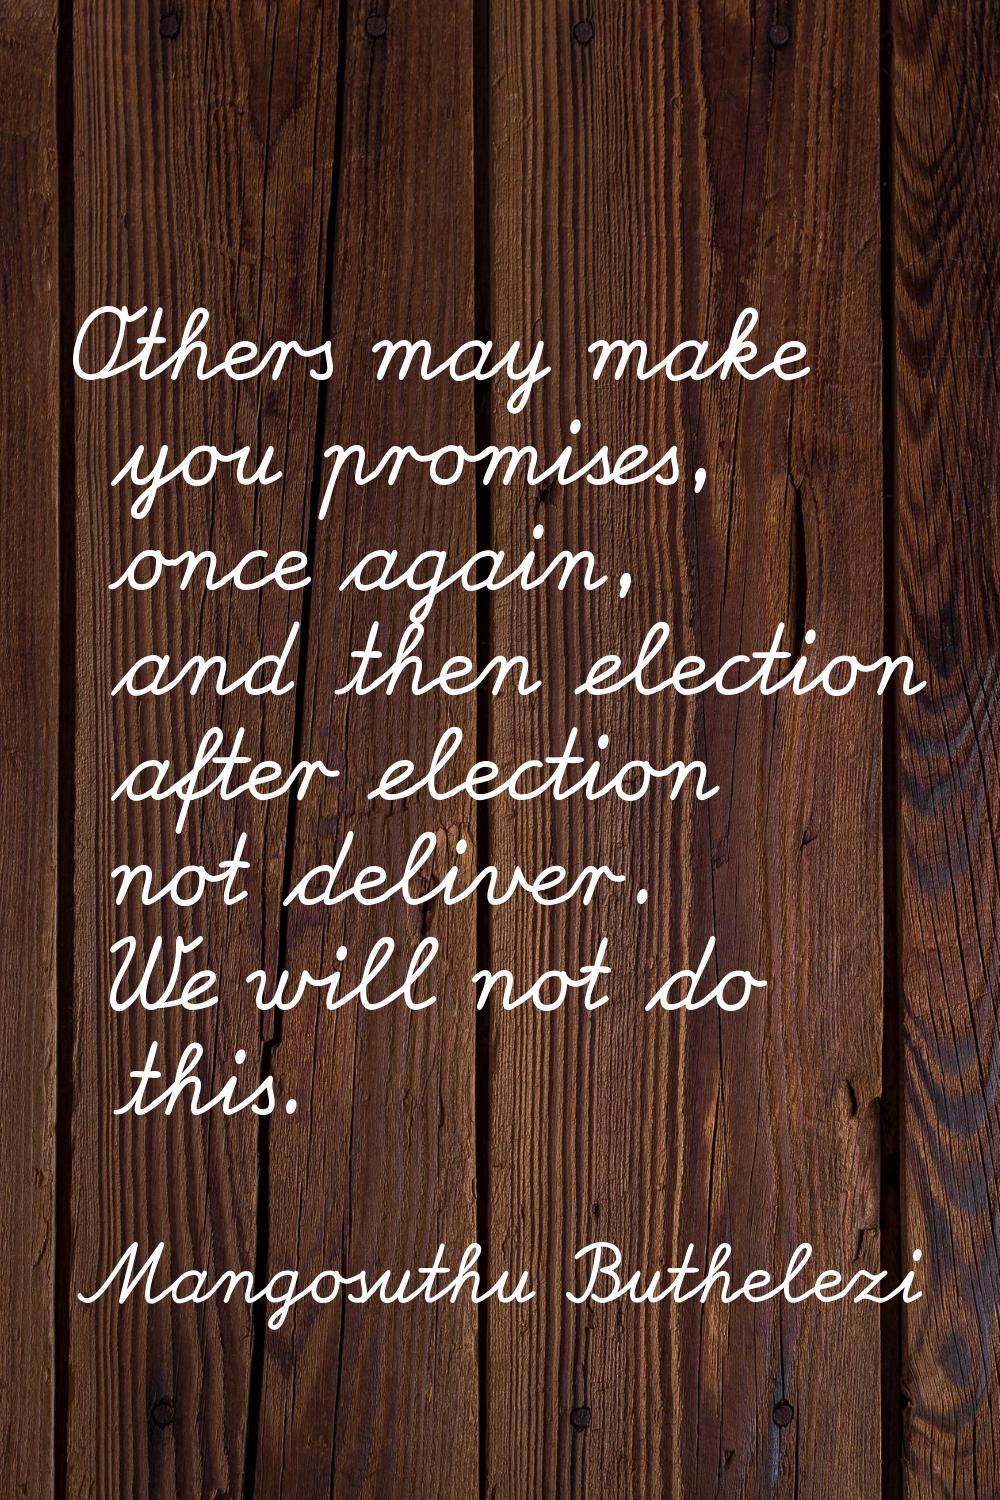 Others may make you promises, once again, and then election after election not deliver. We will not